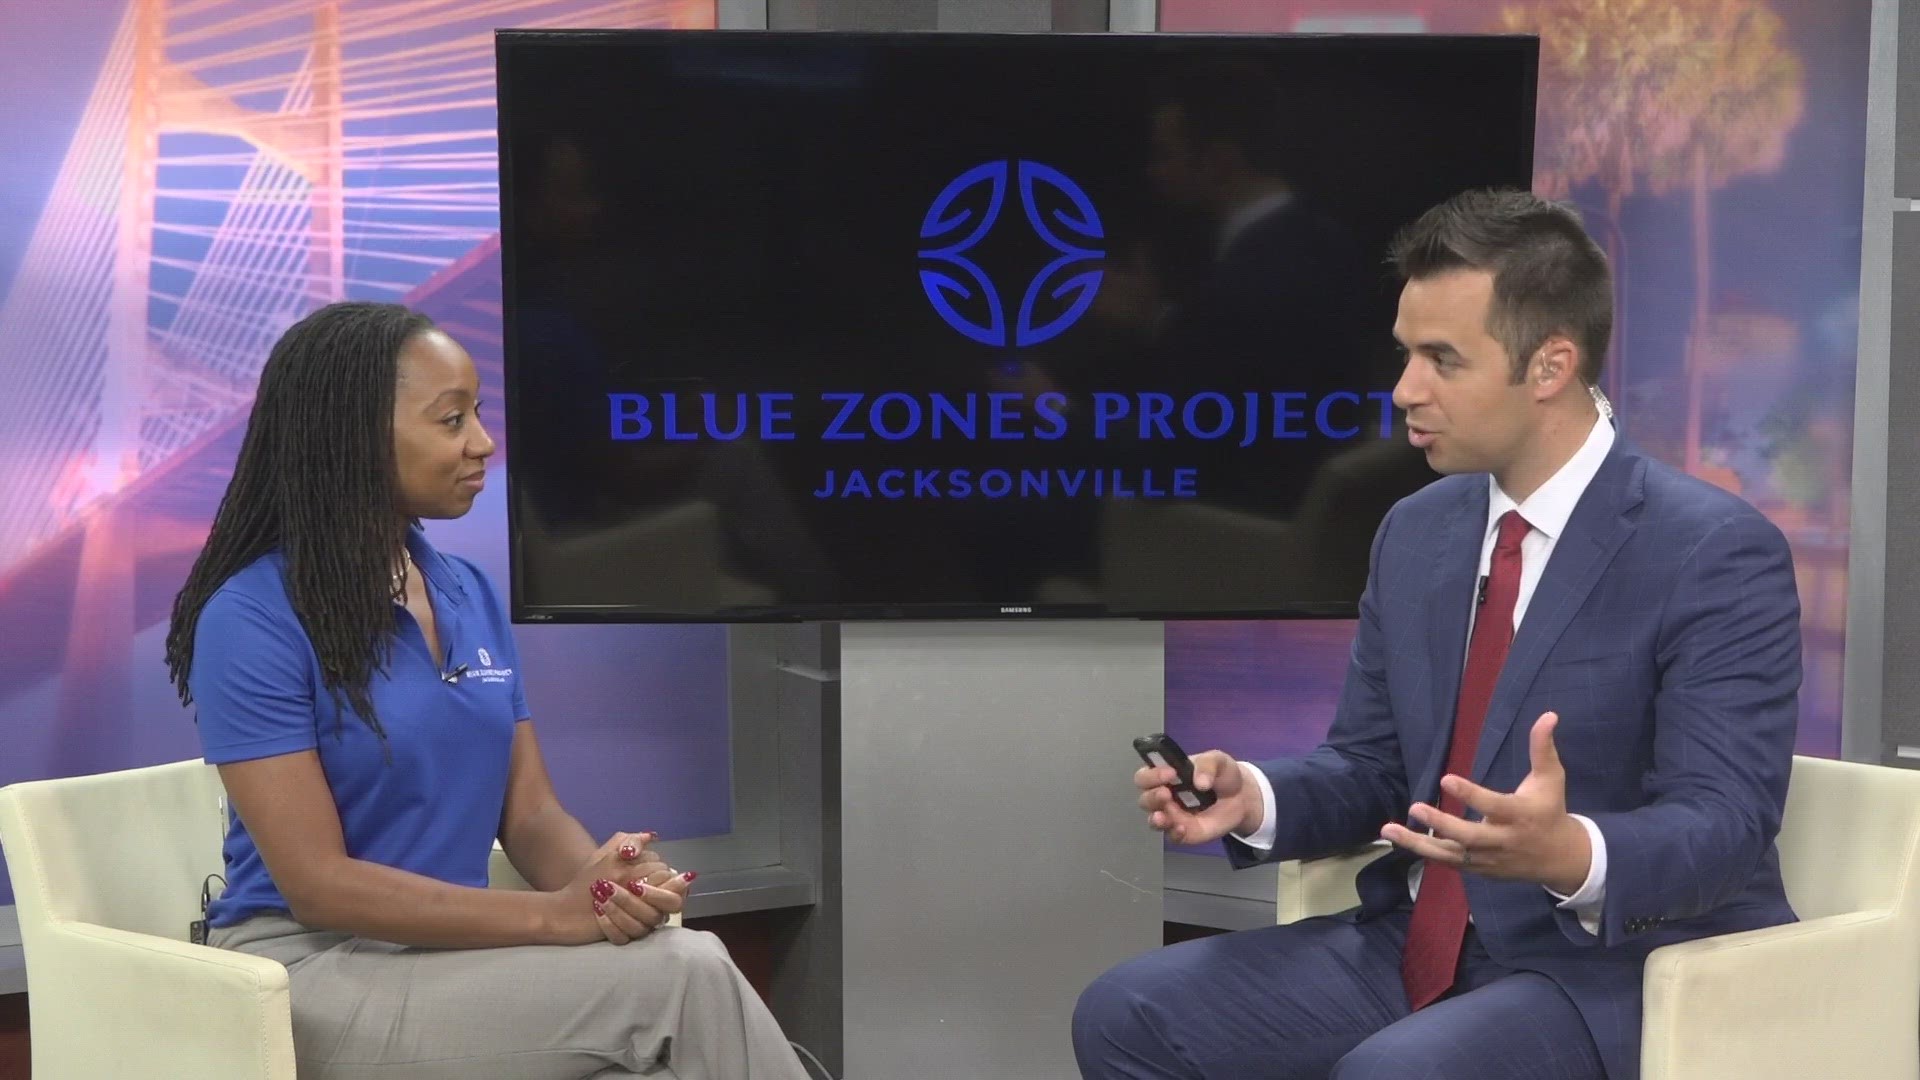 Blue Zones executive director Nicole Hamm joined GMJ to let viewers know about the kickoff event Saturday June 3rd at the Jacksonville Fairgrounds from 9am-2pm.